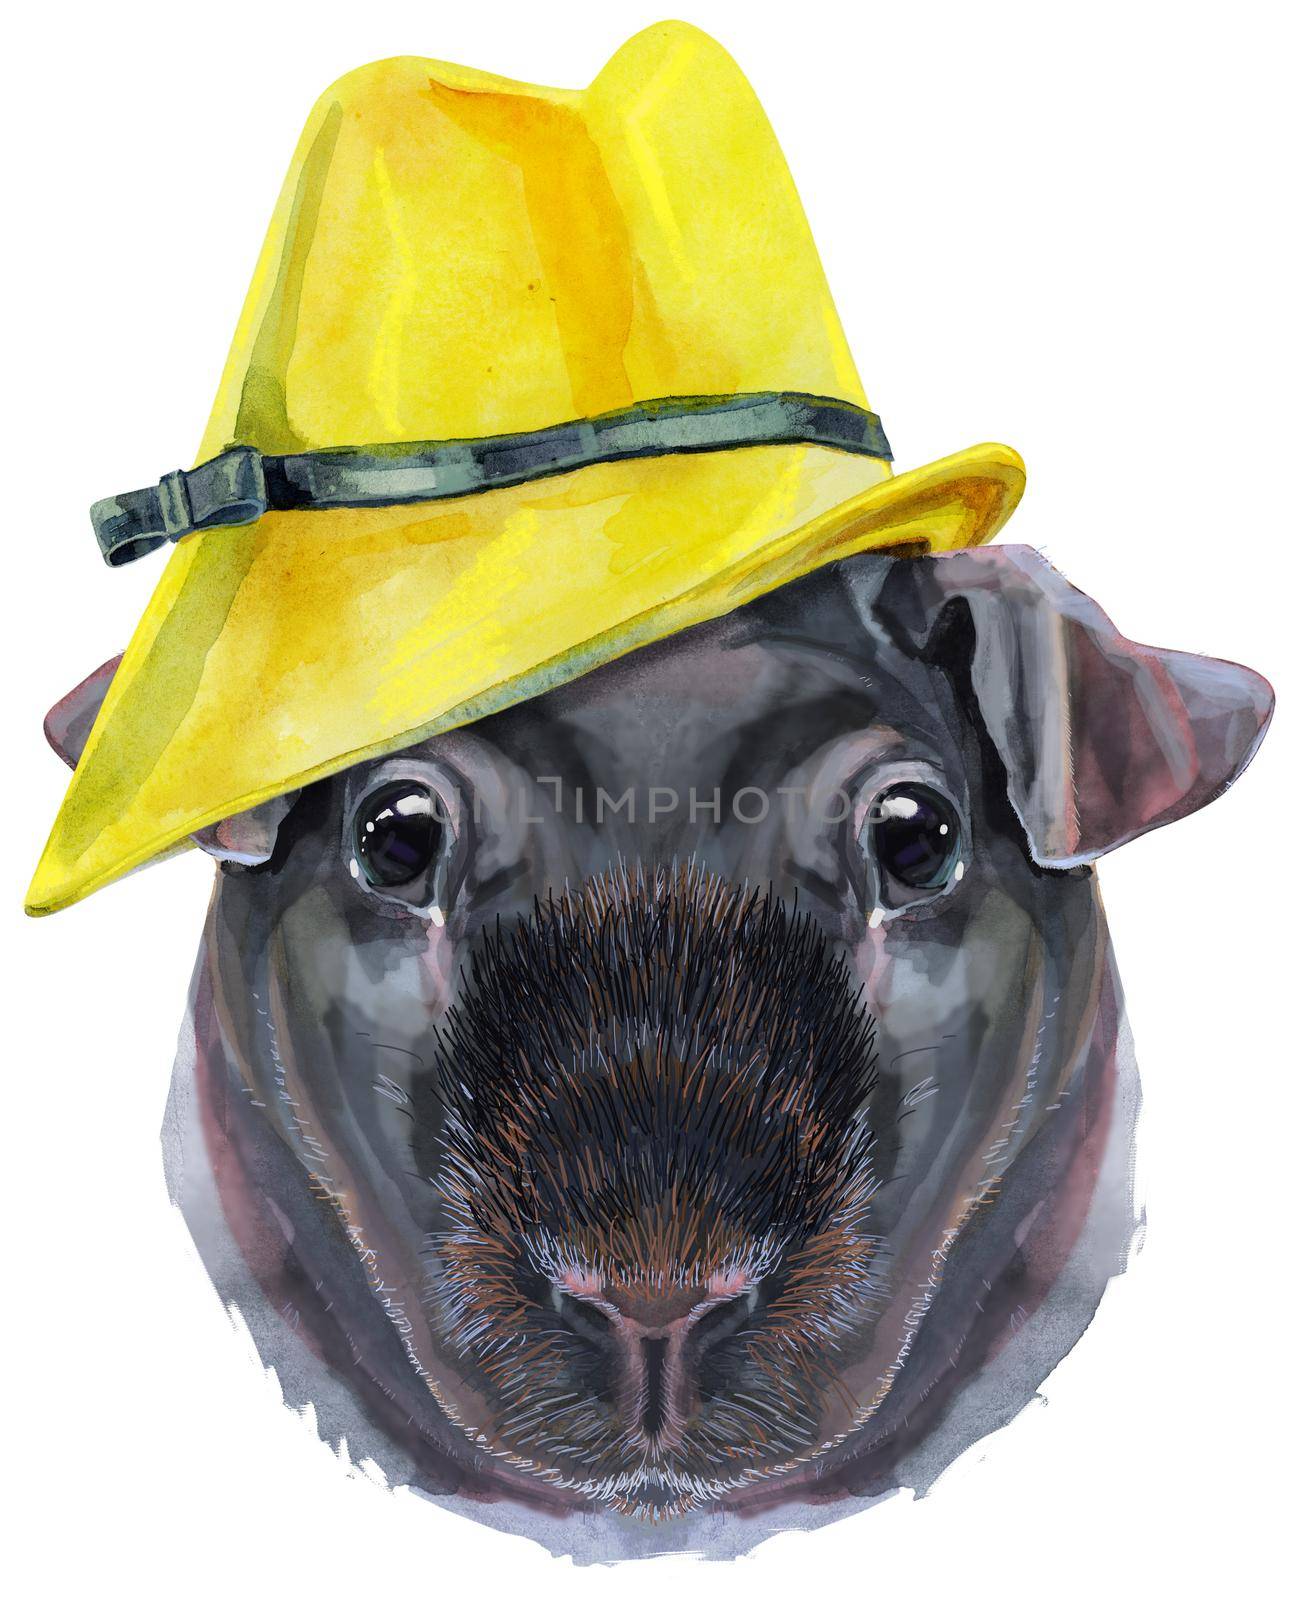 Watercolor portrait of Skinny Guinea Pig in yellow hat on white background by NataOmsk